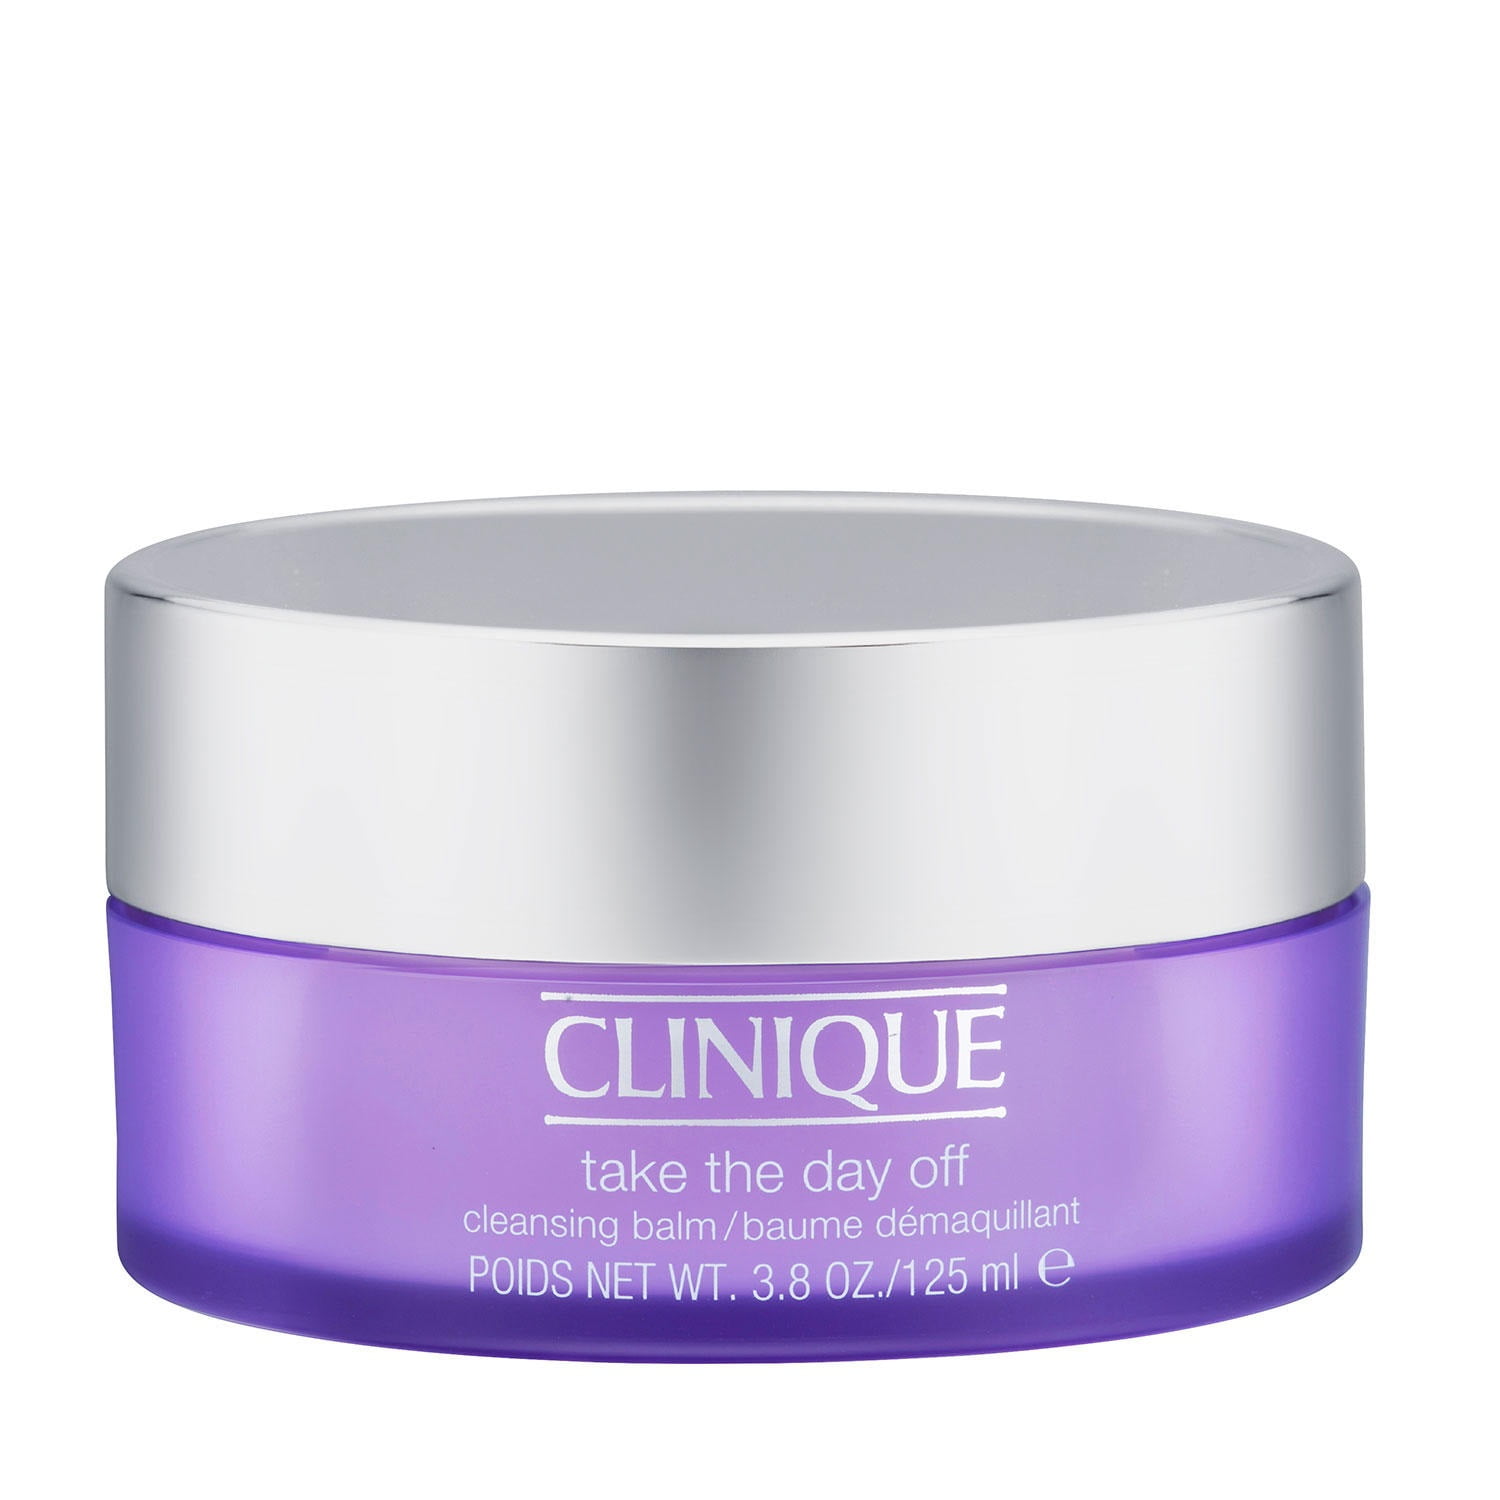 Day Balm, Off oz Cleansing The 3.8 Clinique Take